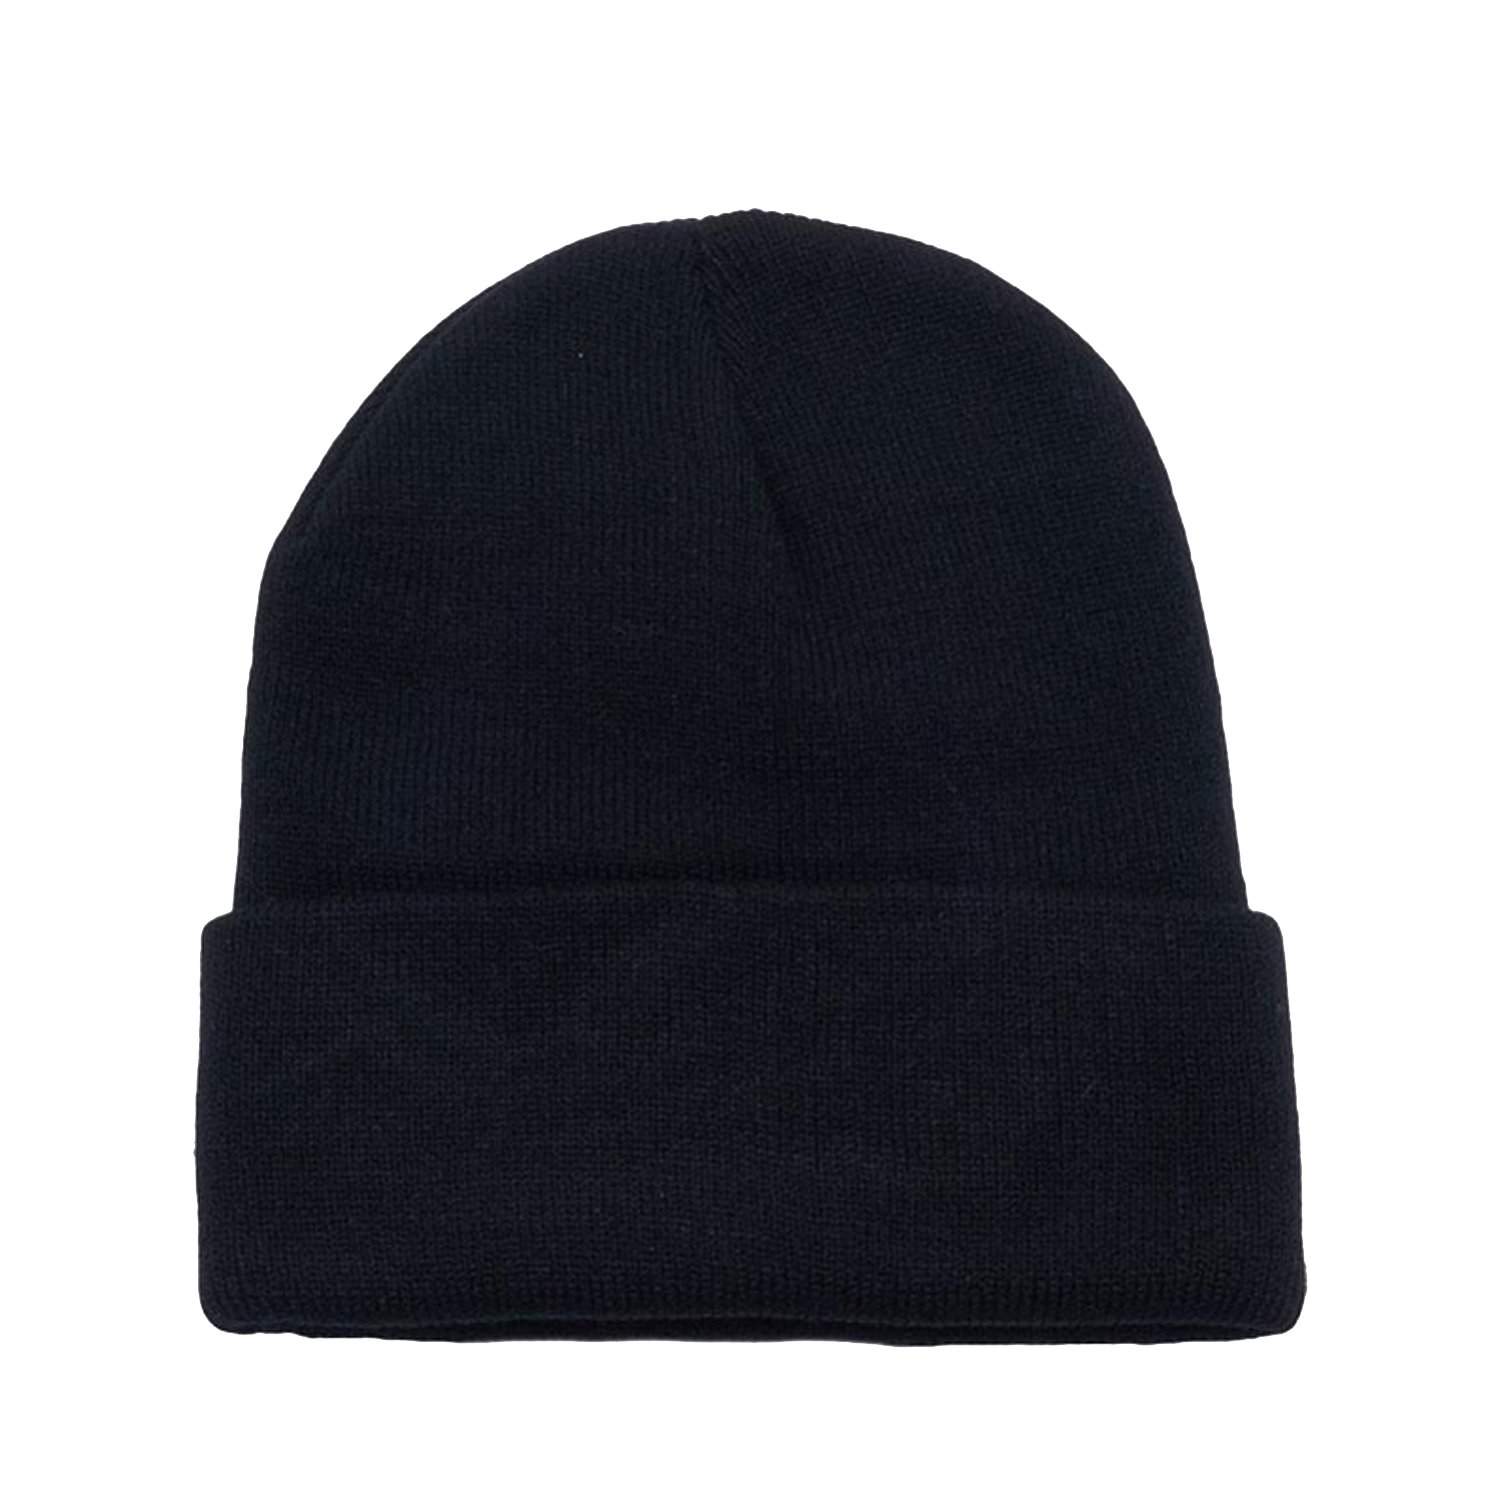 Pack of 5 Cuffed Beanies Skullies for Men and Women